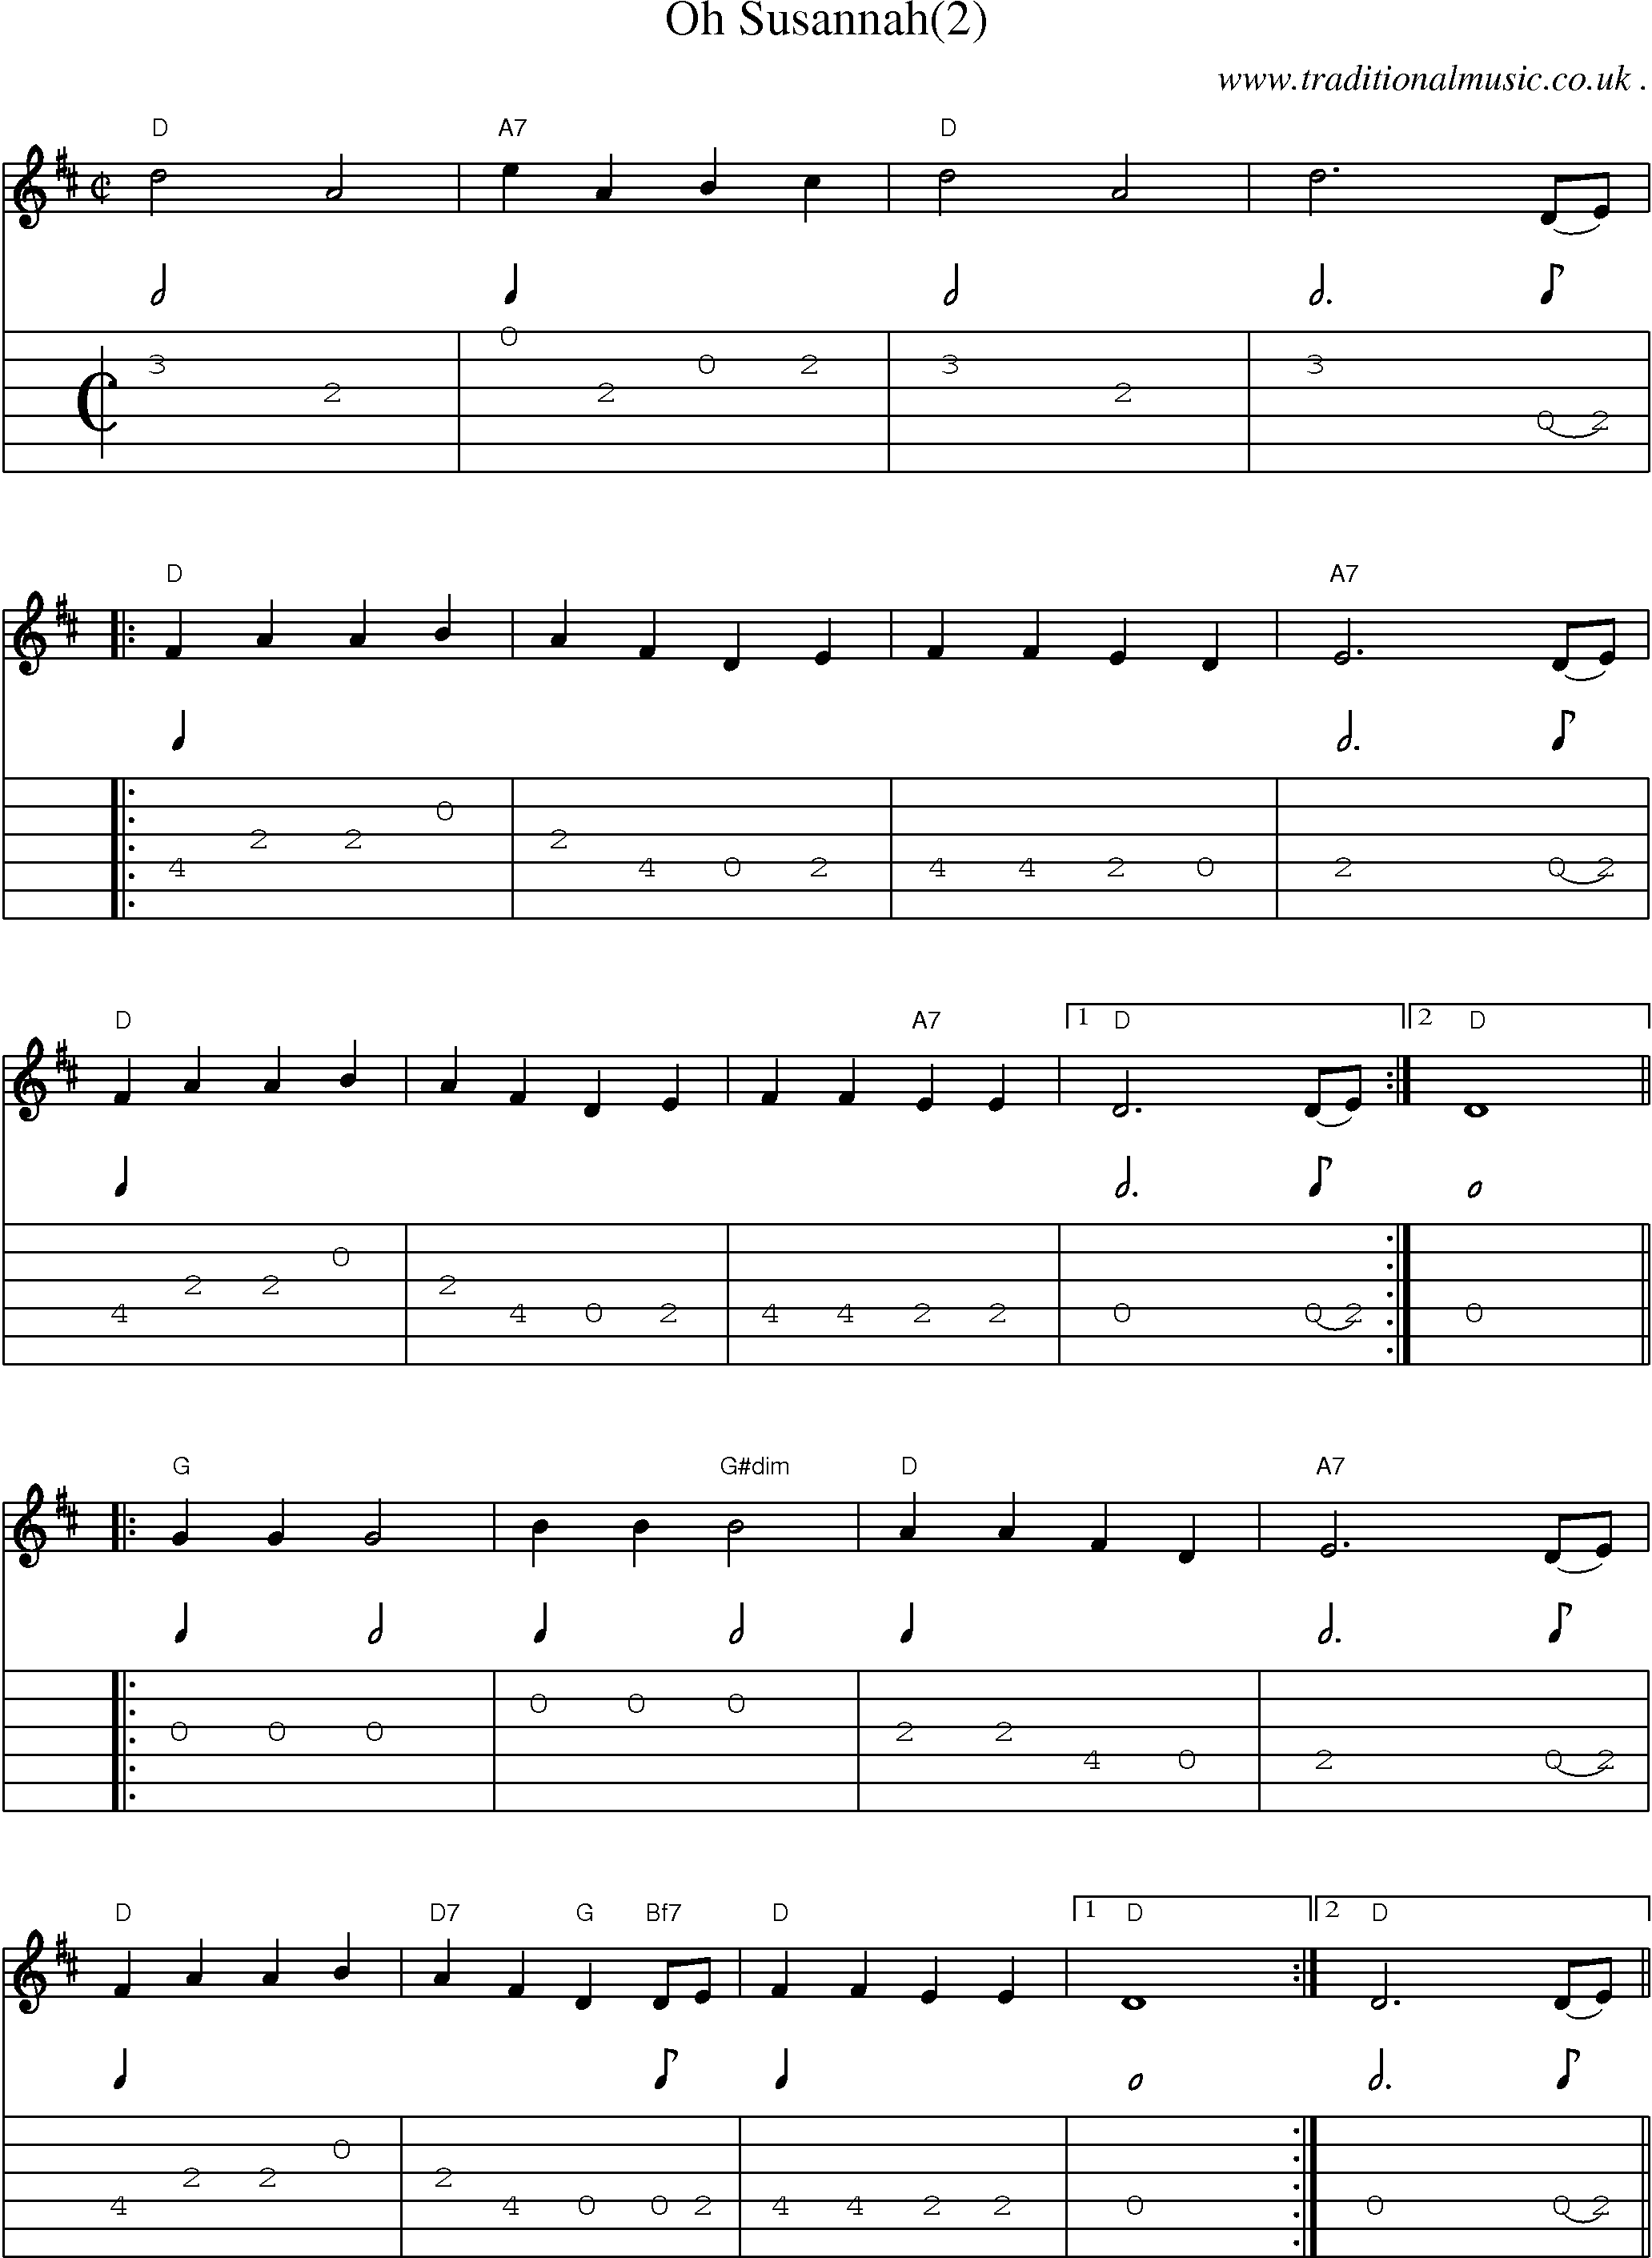 Music Score and Guitar Tabs for Oh Susannah(2)